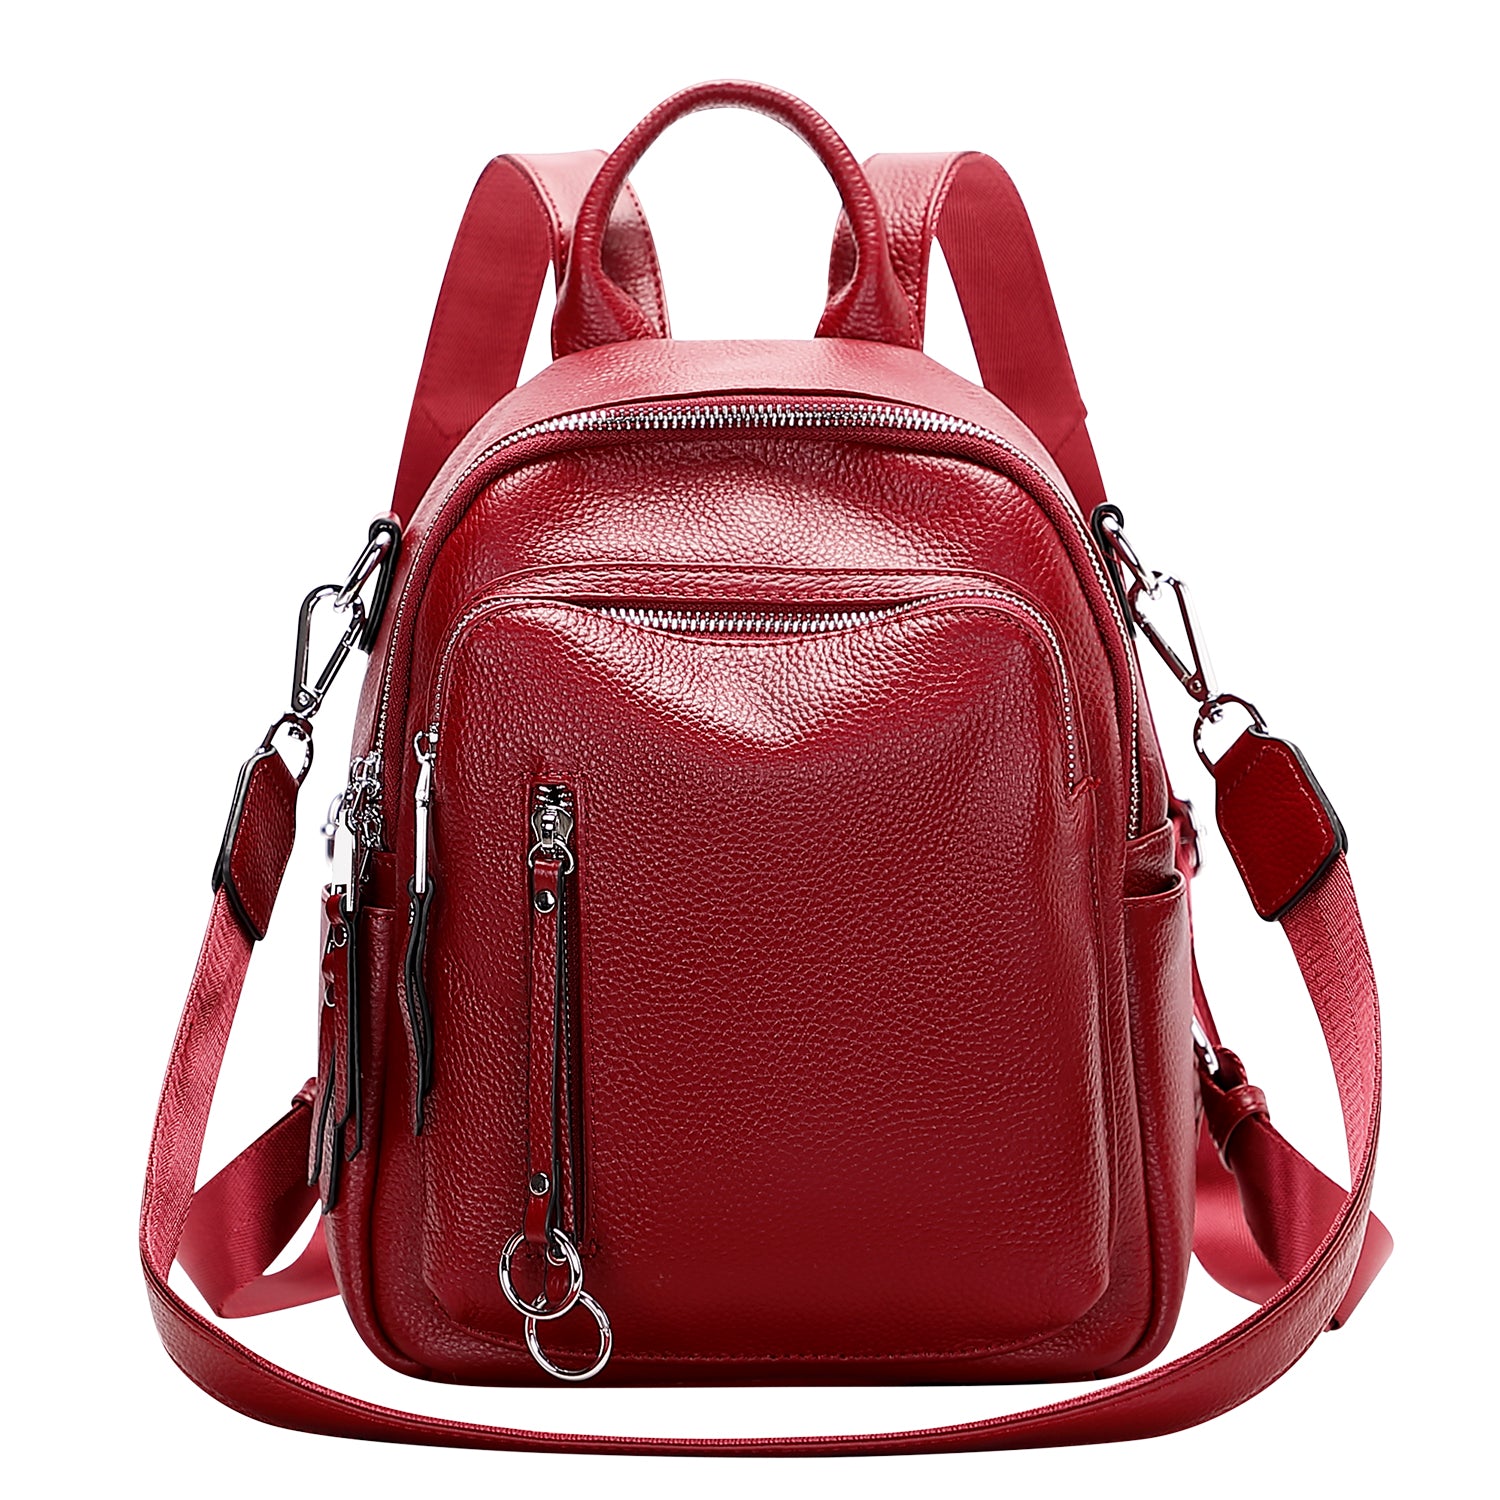 ALTOSY Fashion Genuine Leather Backpack Purse for Women Shoulder Bag Casual  Daypack Small